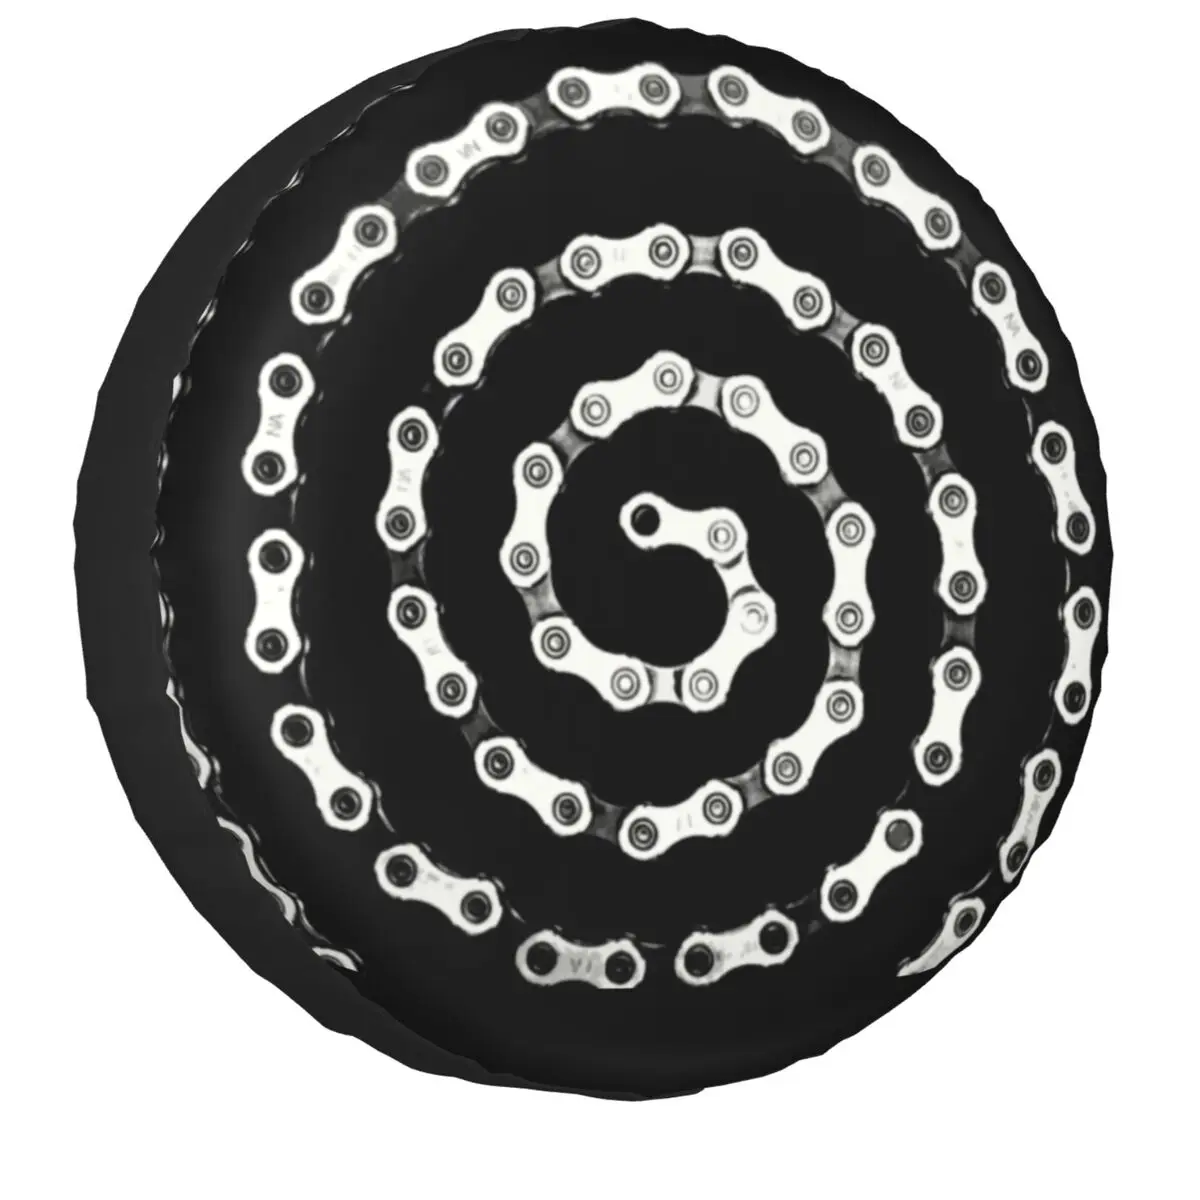 Mountain Bike Chain Spiral Spare Tire Cover for Jeep Hummer Pajero MTB  Bicycle Dust-Proof Car Wheel Covers 14